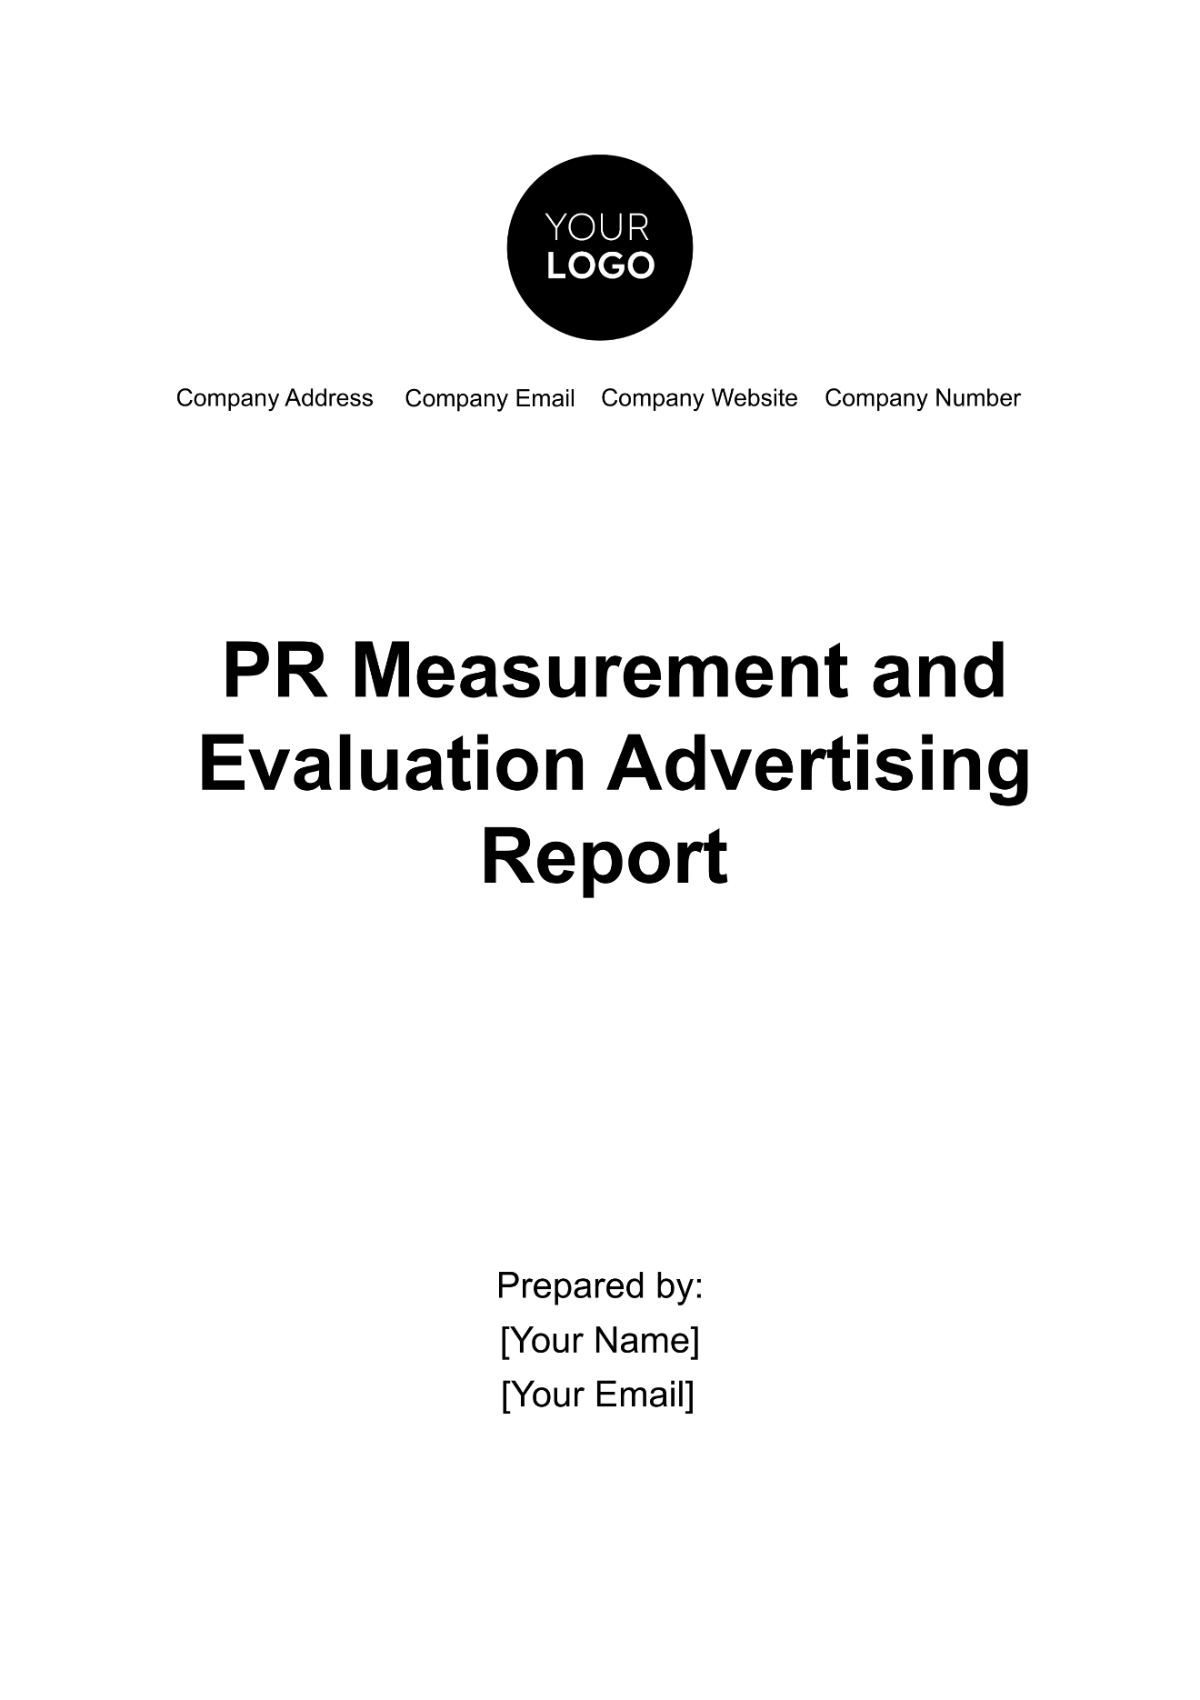 PR Measurement and Evaluation Advertising Report Template